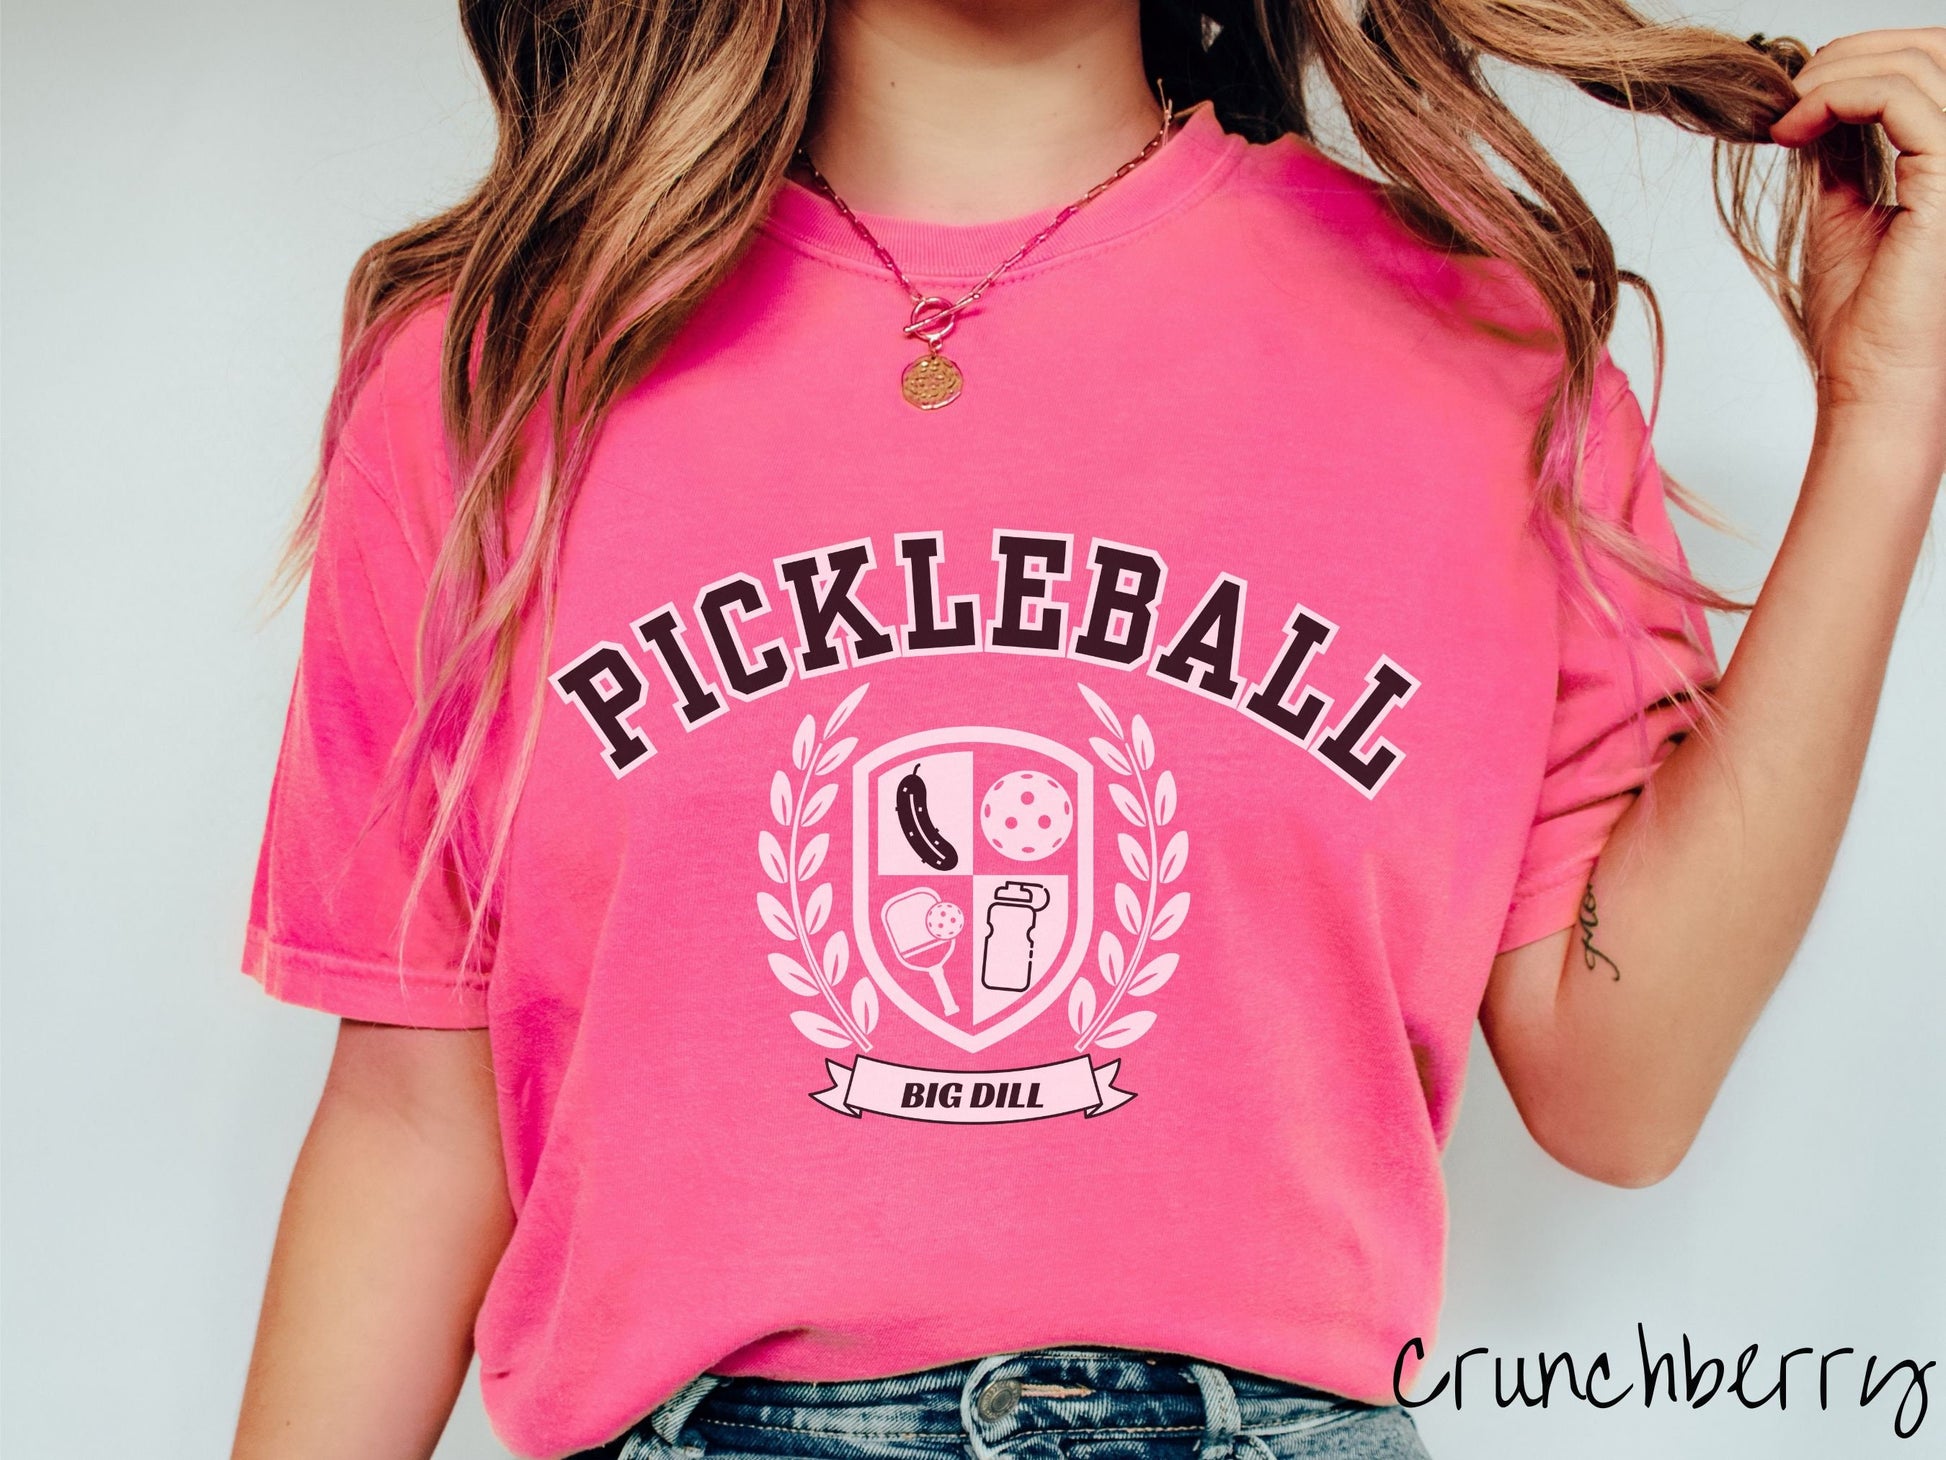 A woman wearing a cute crunchberry colored shirt with the text Pickleball across the top, a varsity logo centered underneath, and the words Big Dill underneath the logo.